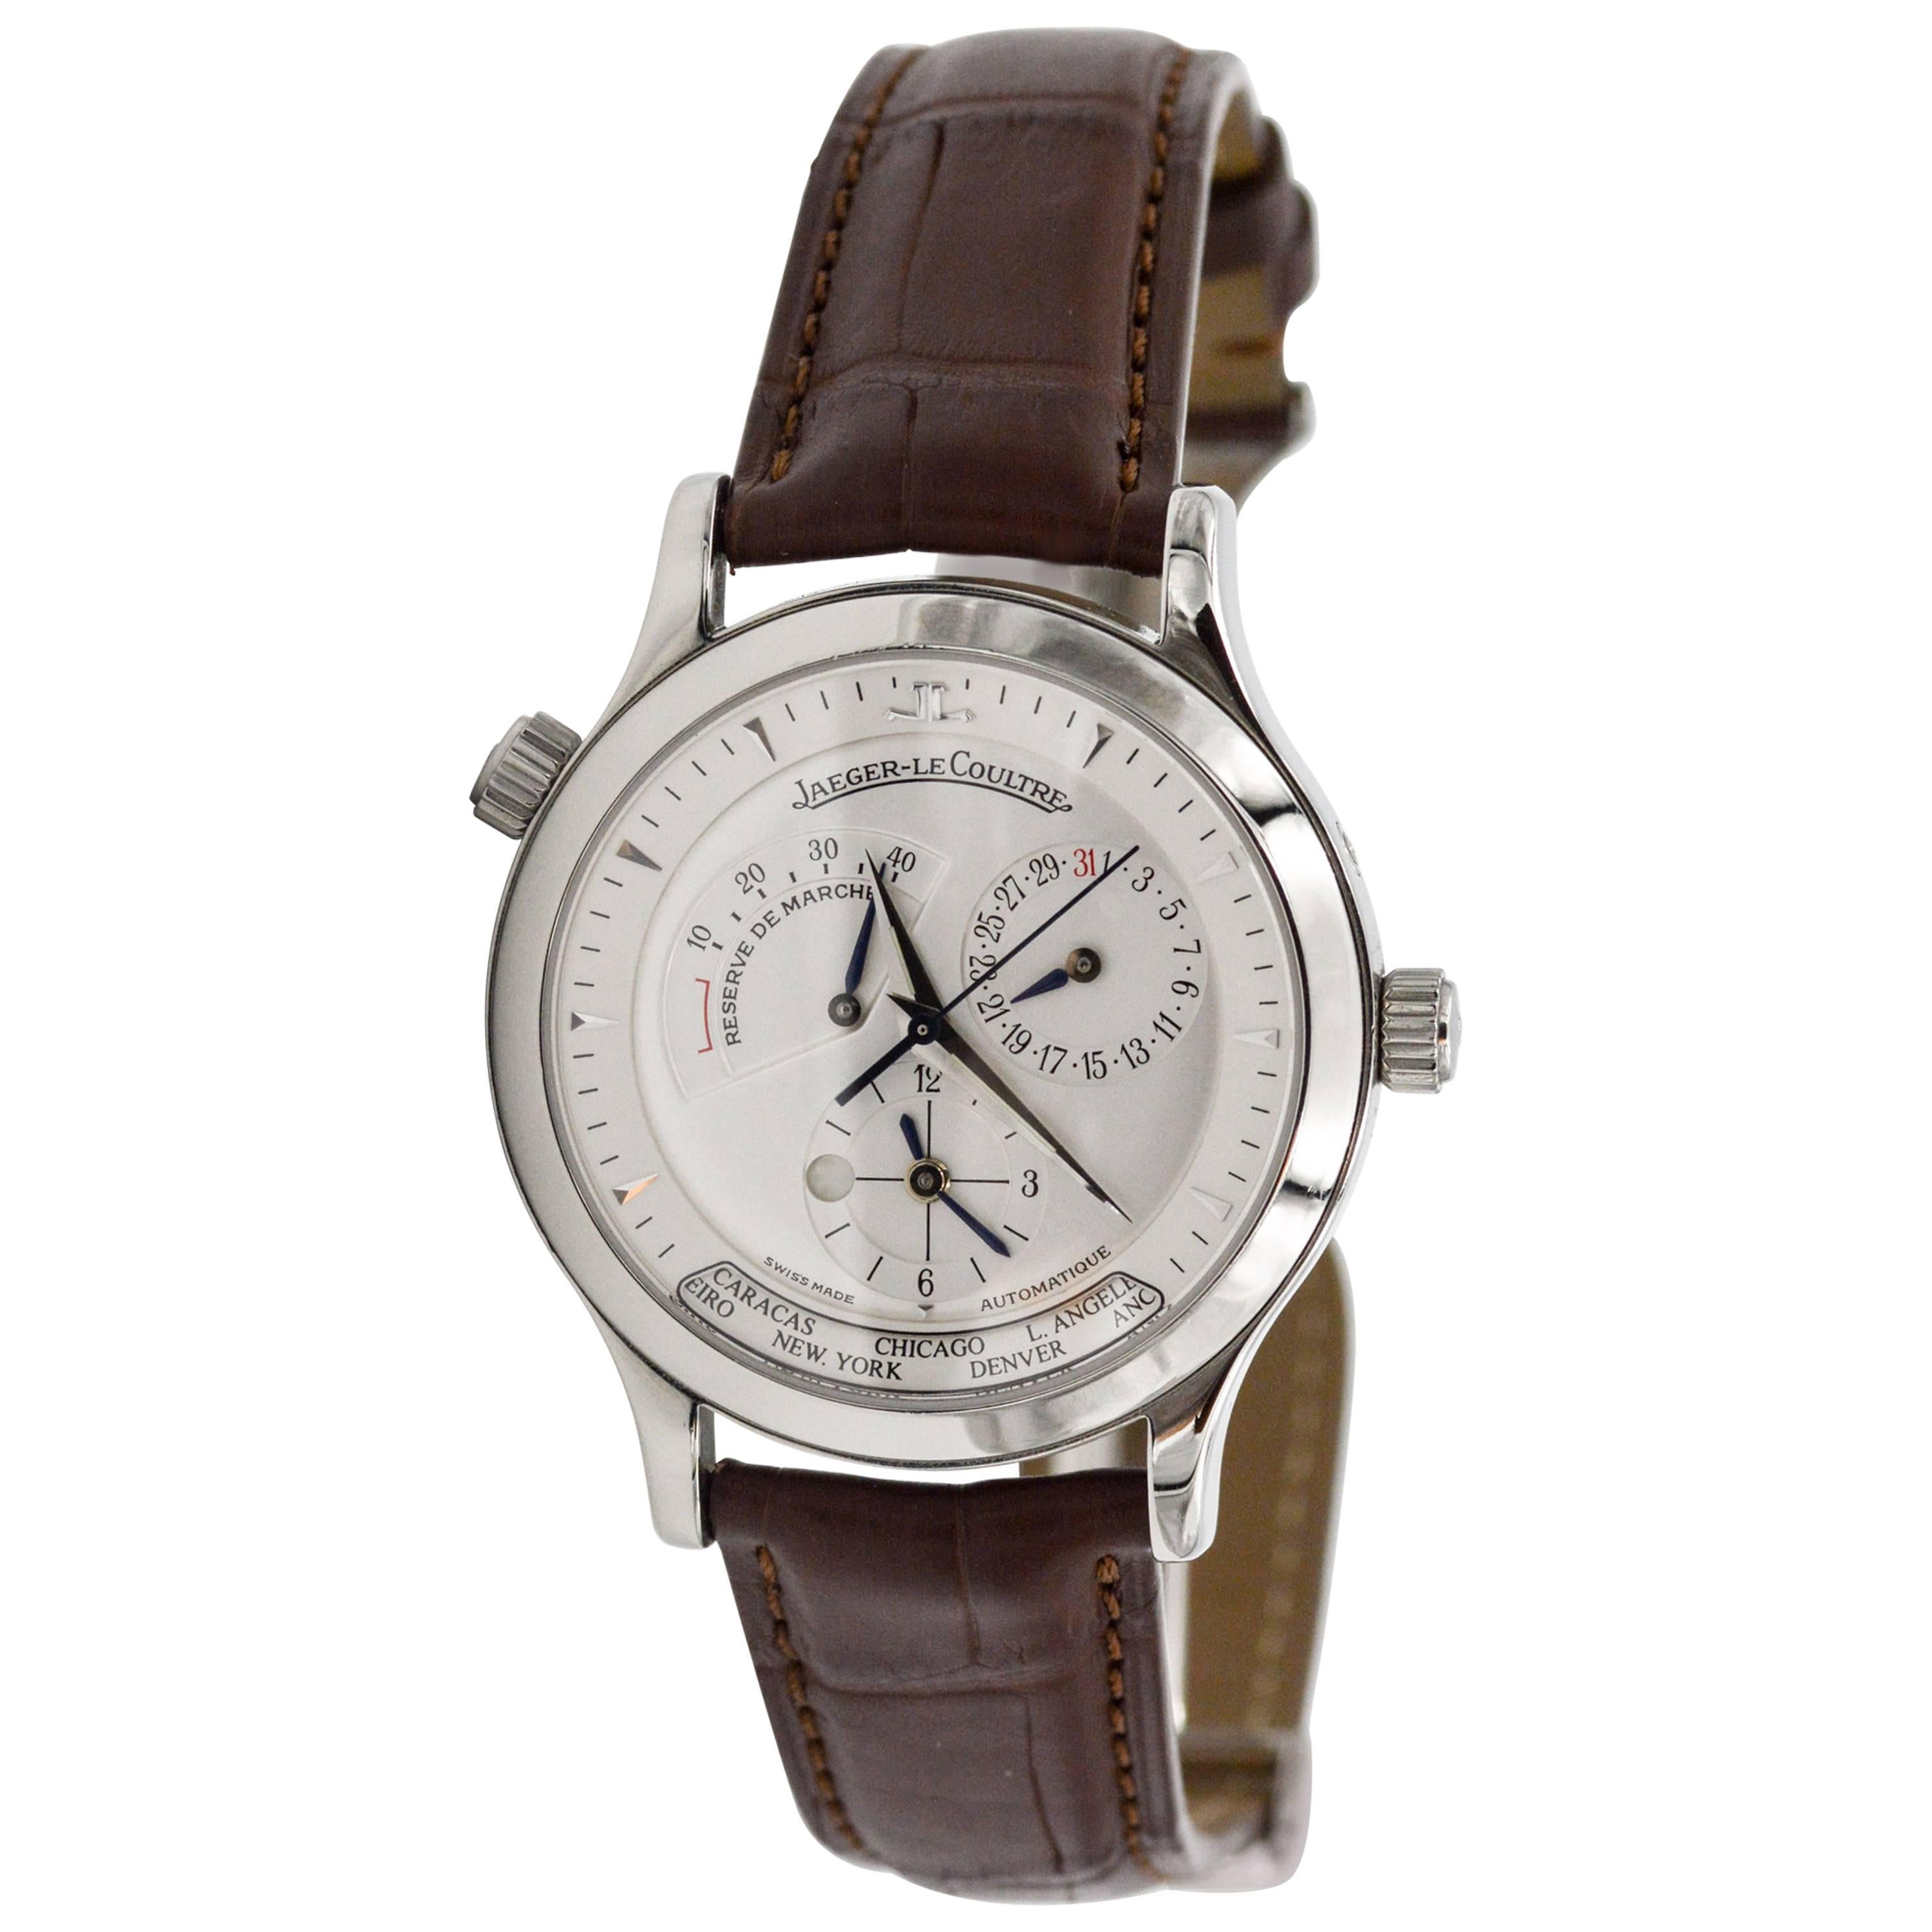 Jaeger LeCoultre Stainless Steel Master Geographic Wristwatch